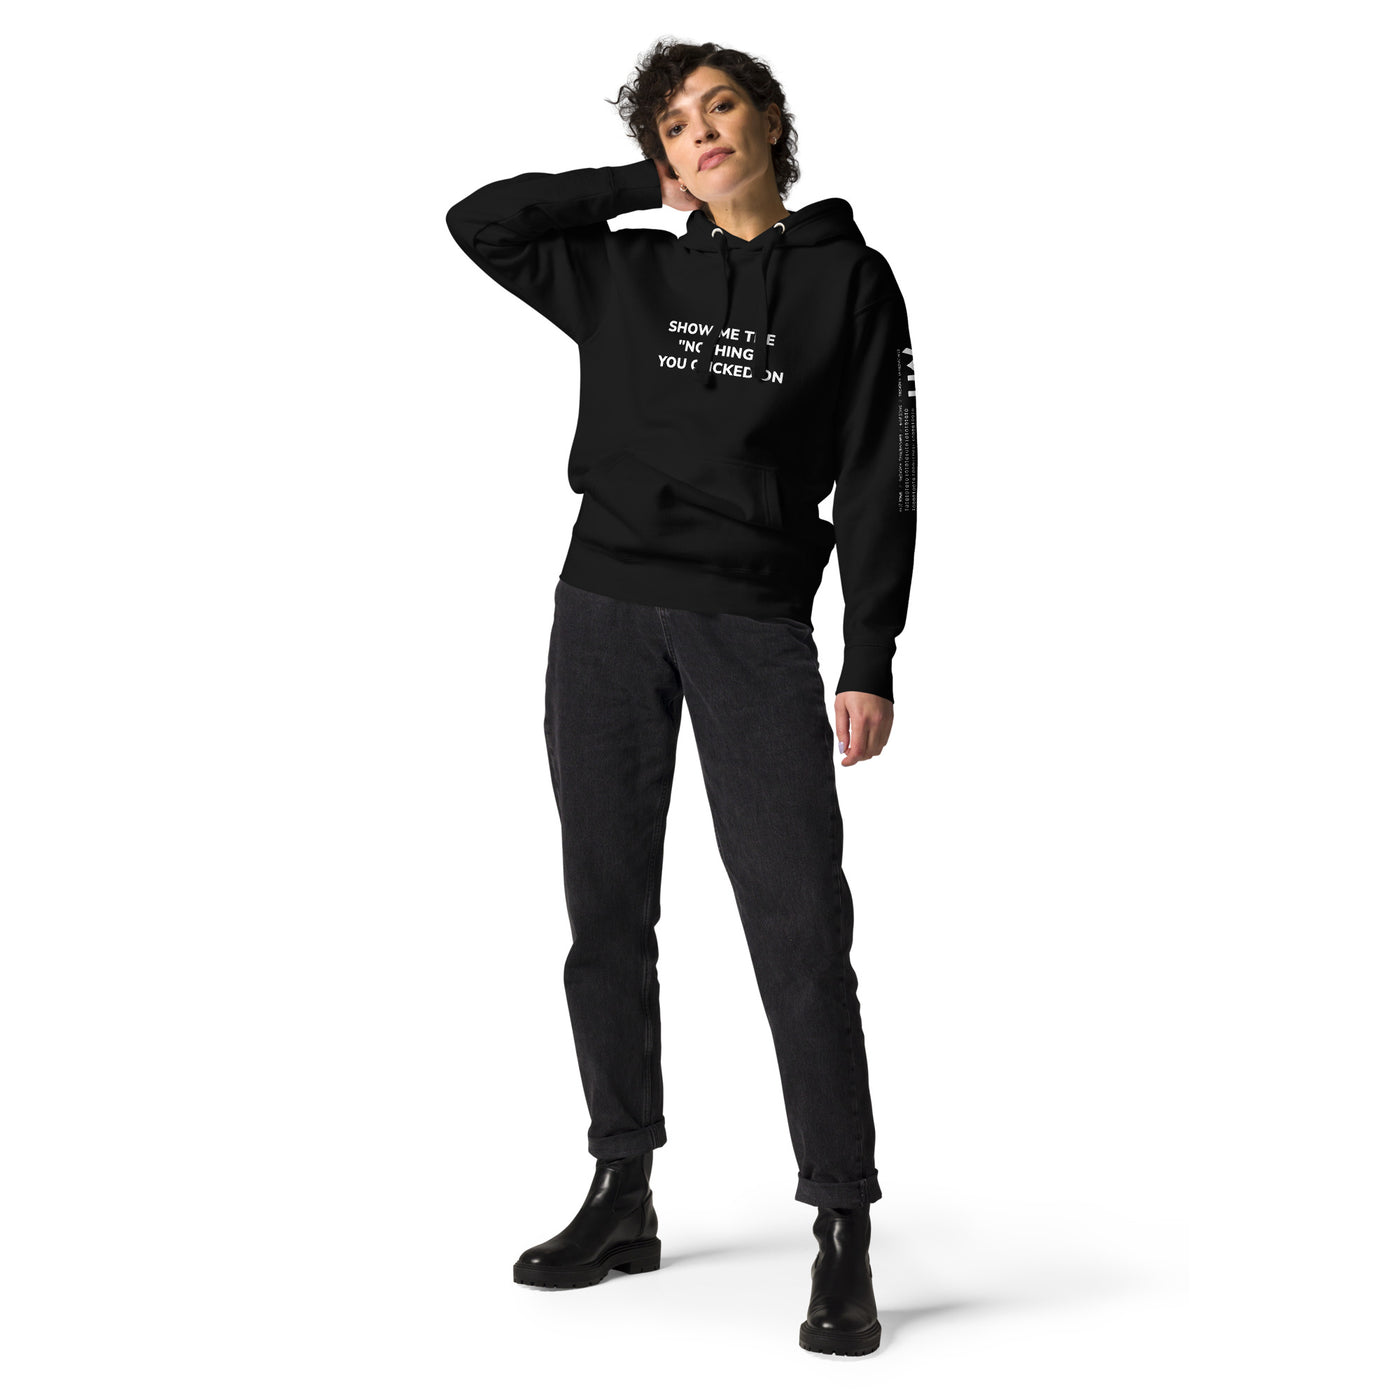 Show me the Nothing you Clicked on Unisex Hoodie